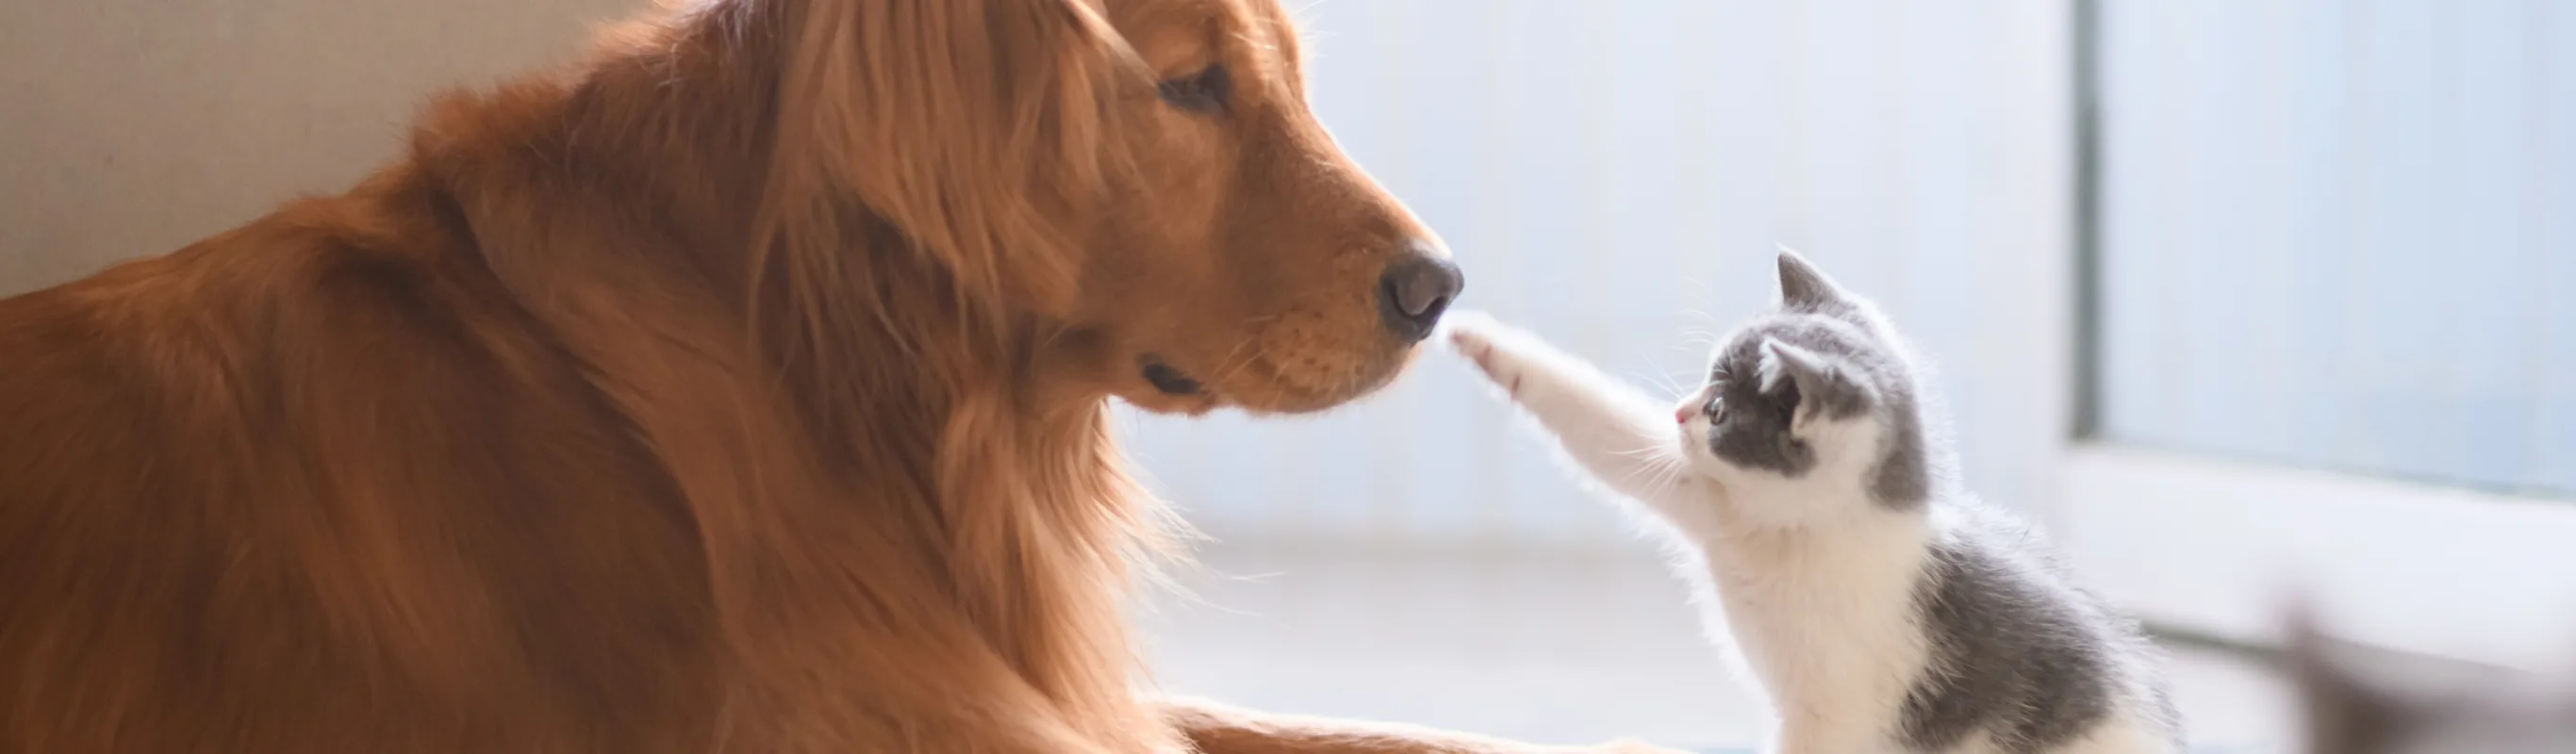 cat paw touching dogs nose